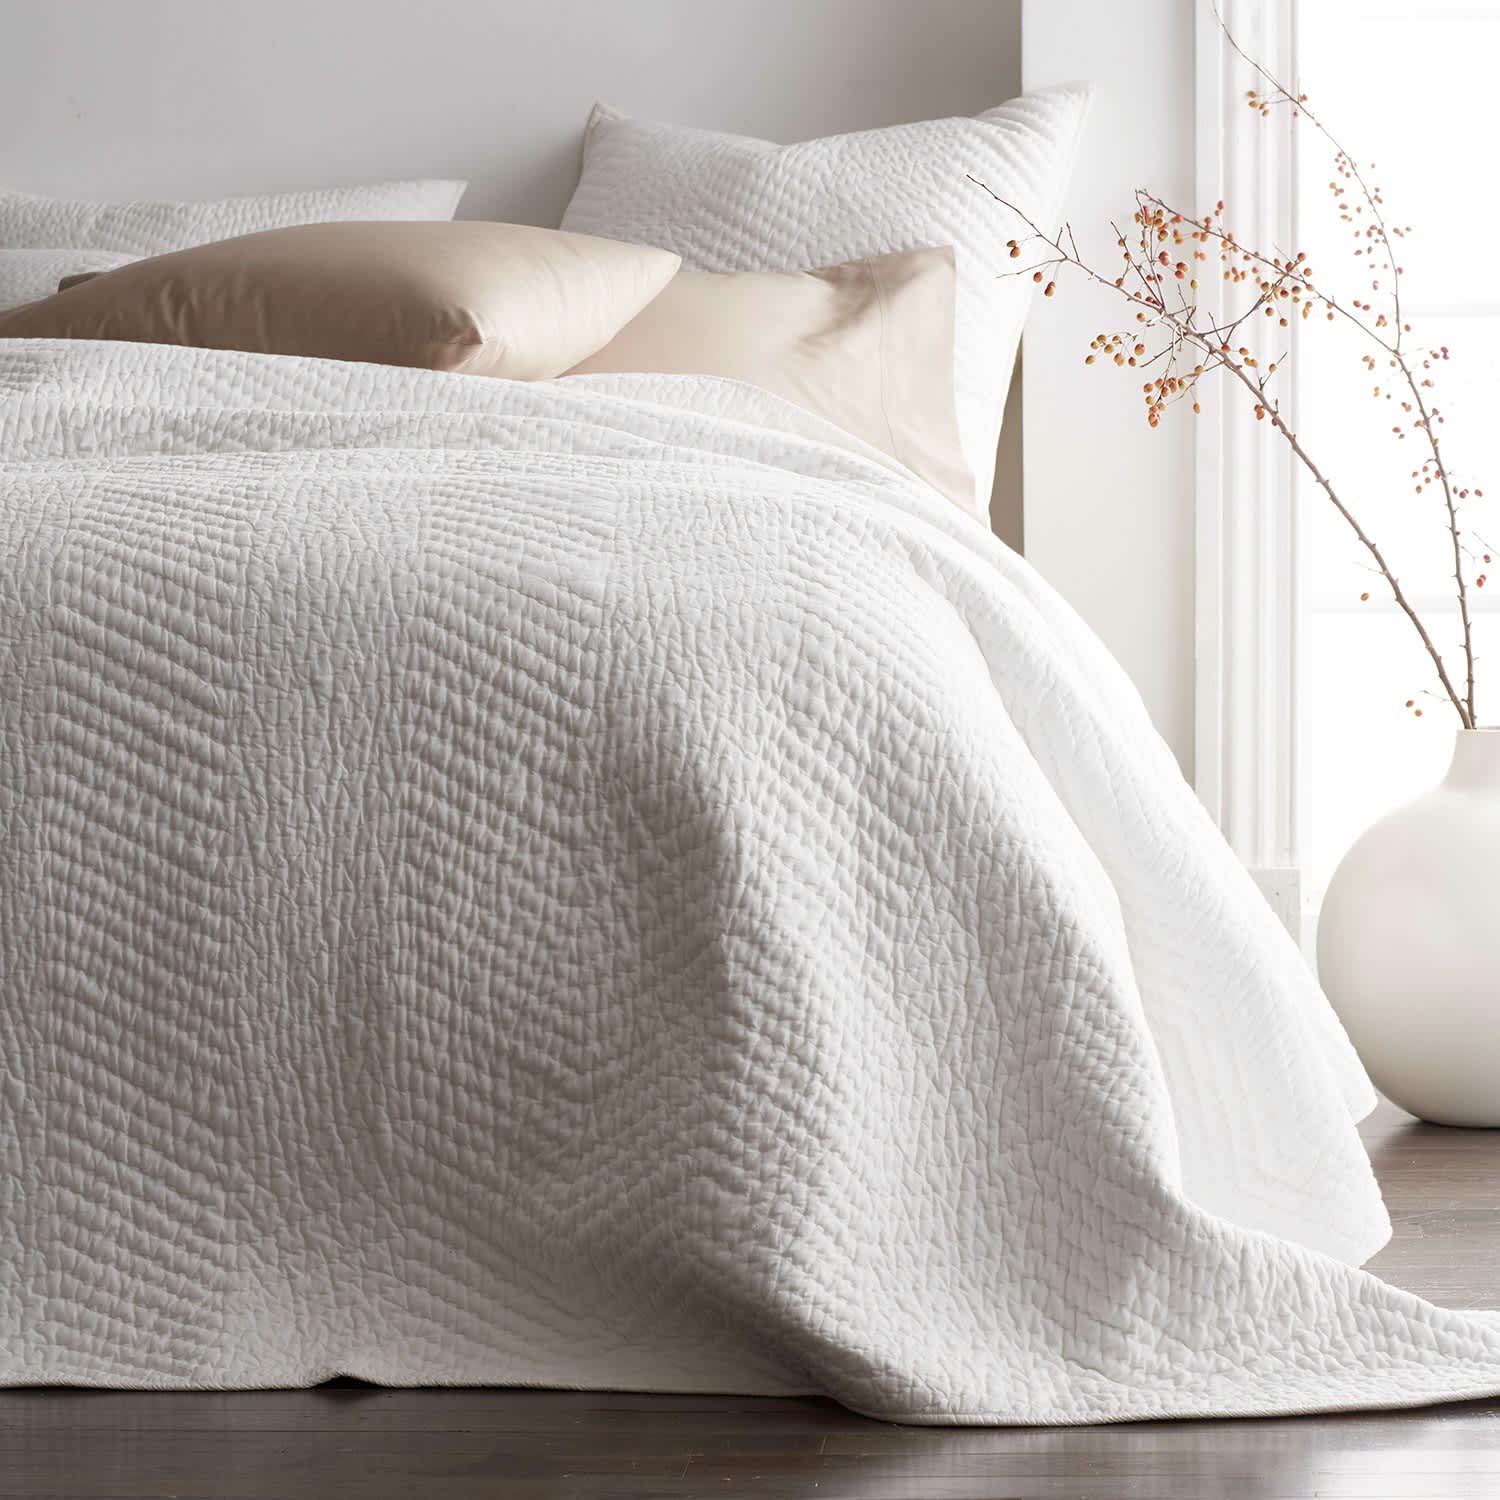 Best Lightweight Quilts and Comforters 